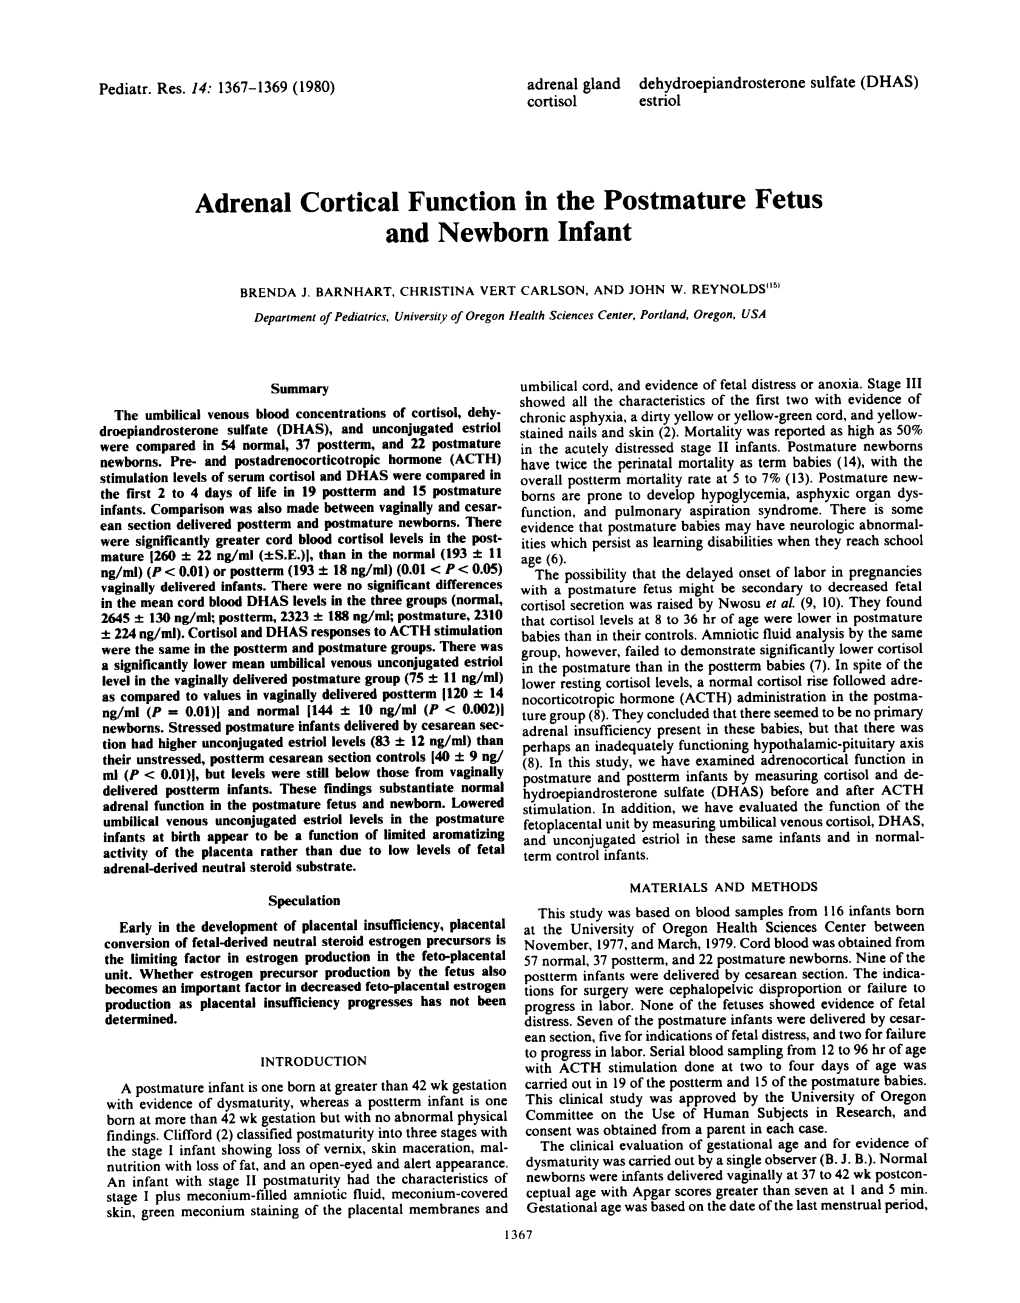 Adrenal Cortical Function in the Postmature Fetus and Newborn Infant